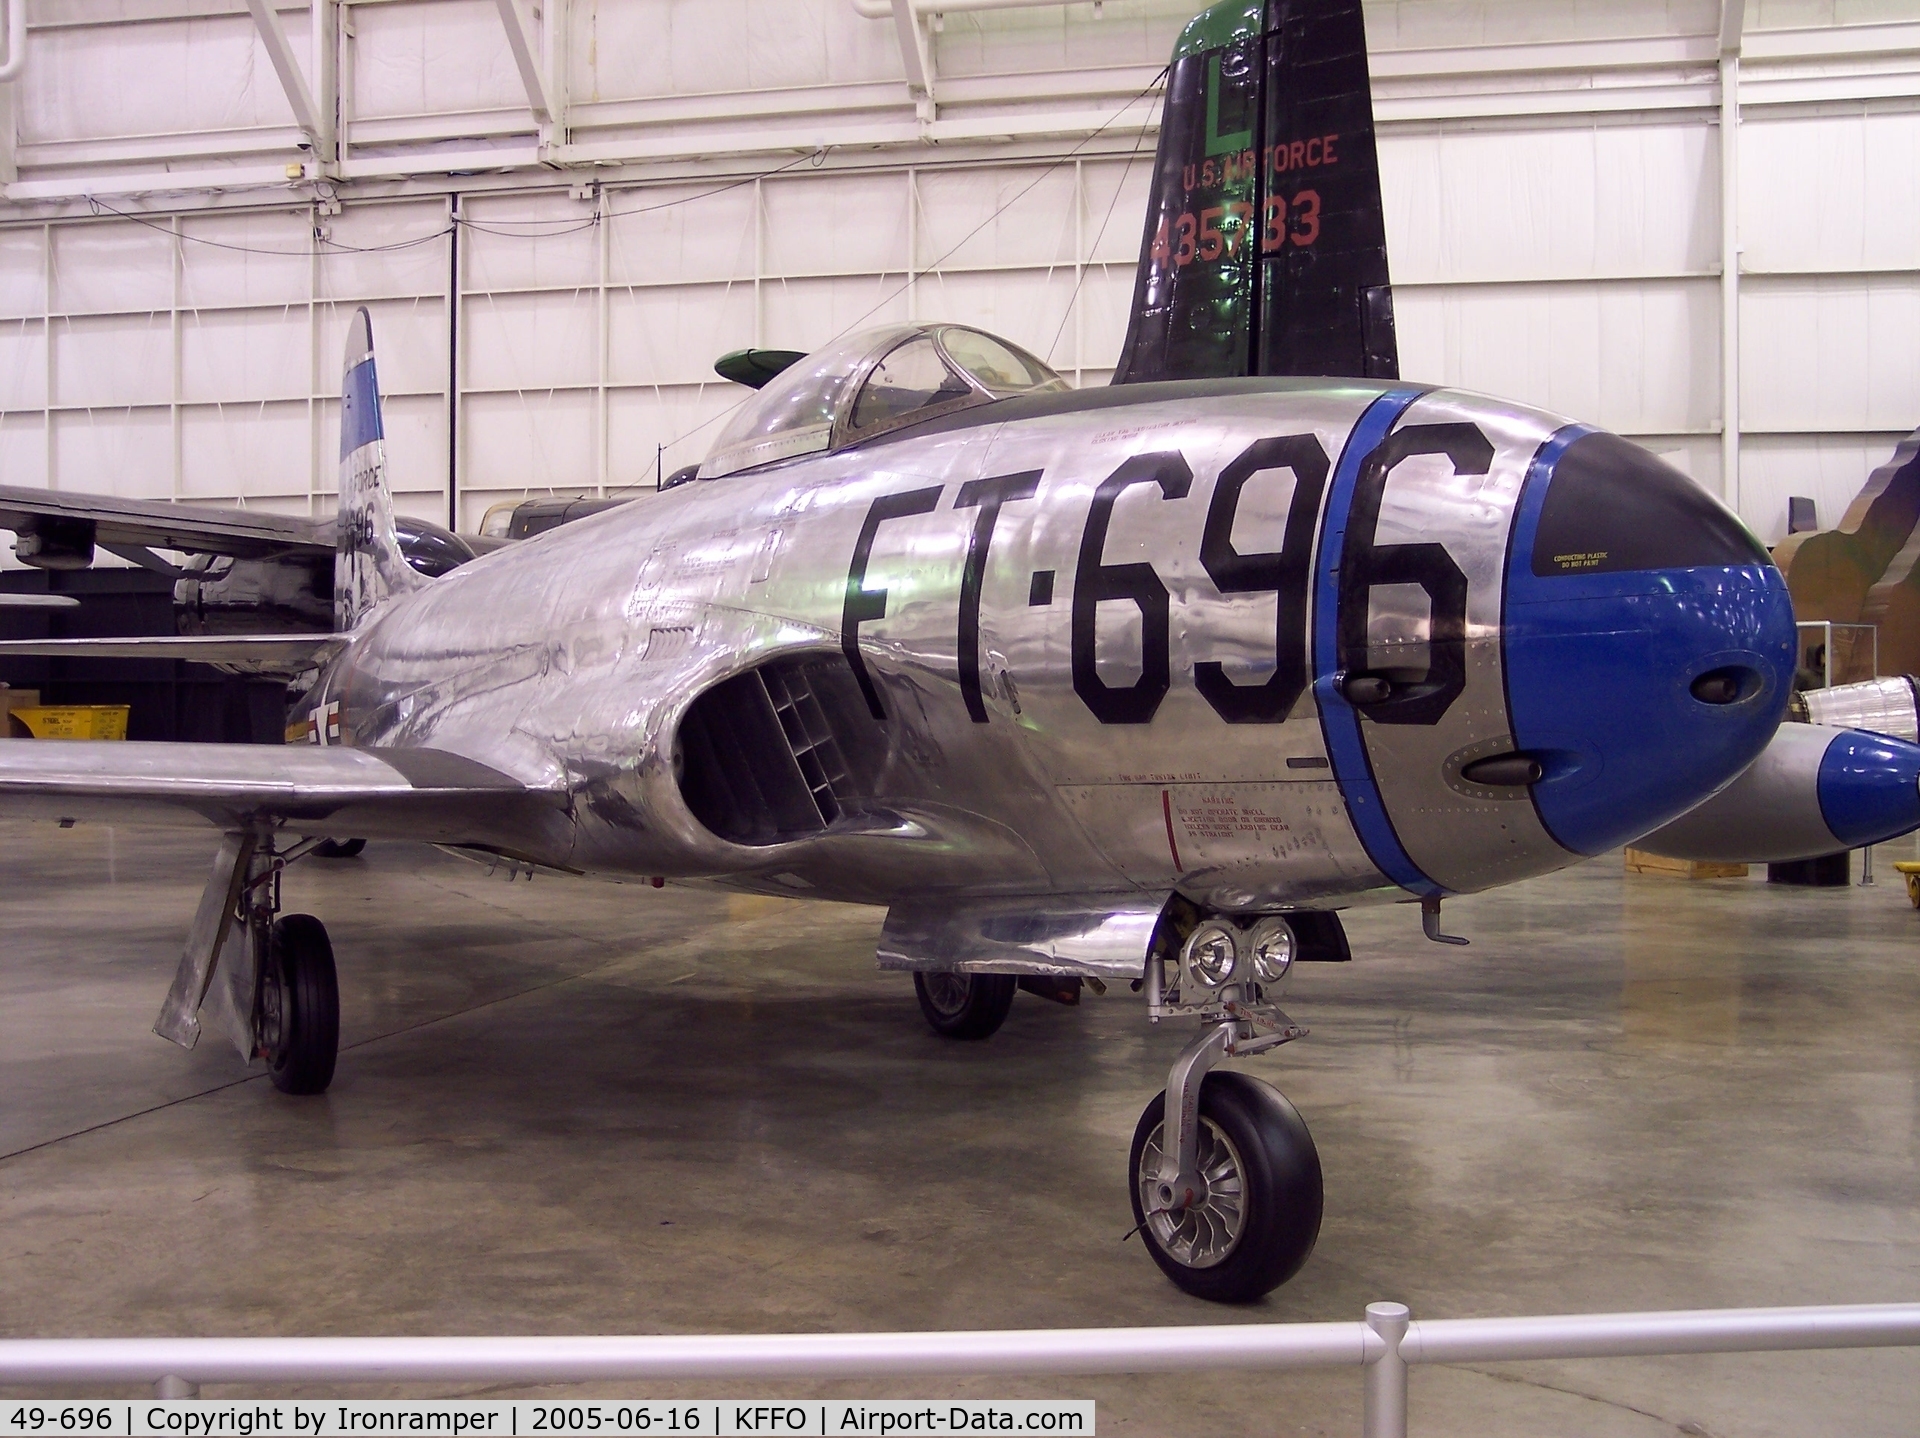 49-696, 1949 Lockheed F-80C-10-LO Shooting Star C/N 080-2340, The F-80C on display is one of the few remaining Shooting Stars which flew combat missions during the Korean War. It is painted in the markings of a unit to which it was assigned in 1950, the 8th Fighter-Bomber Group, 35th Fighter-Bomber Squadron.